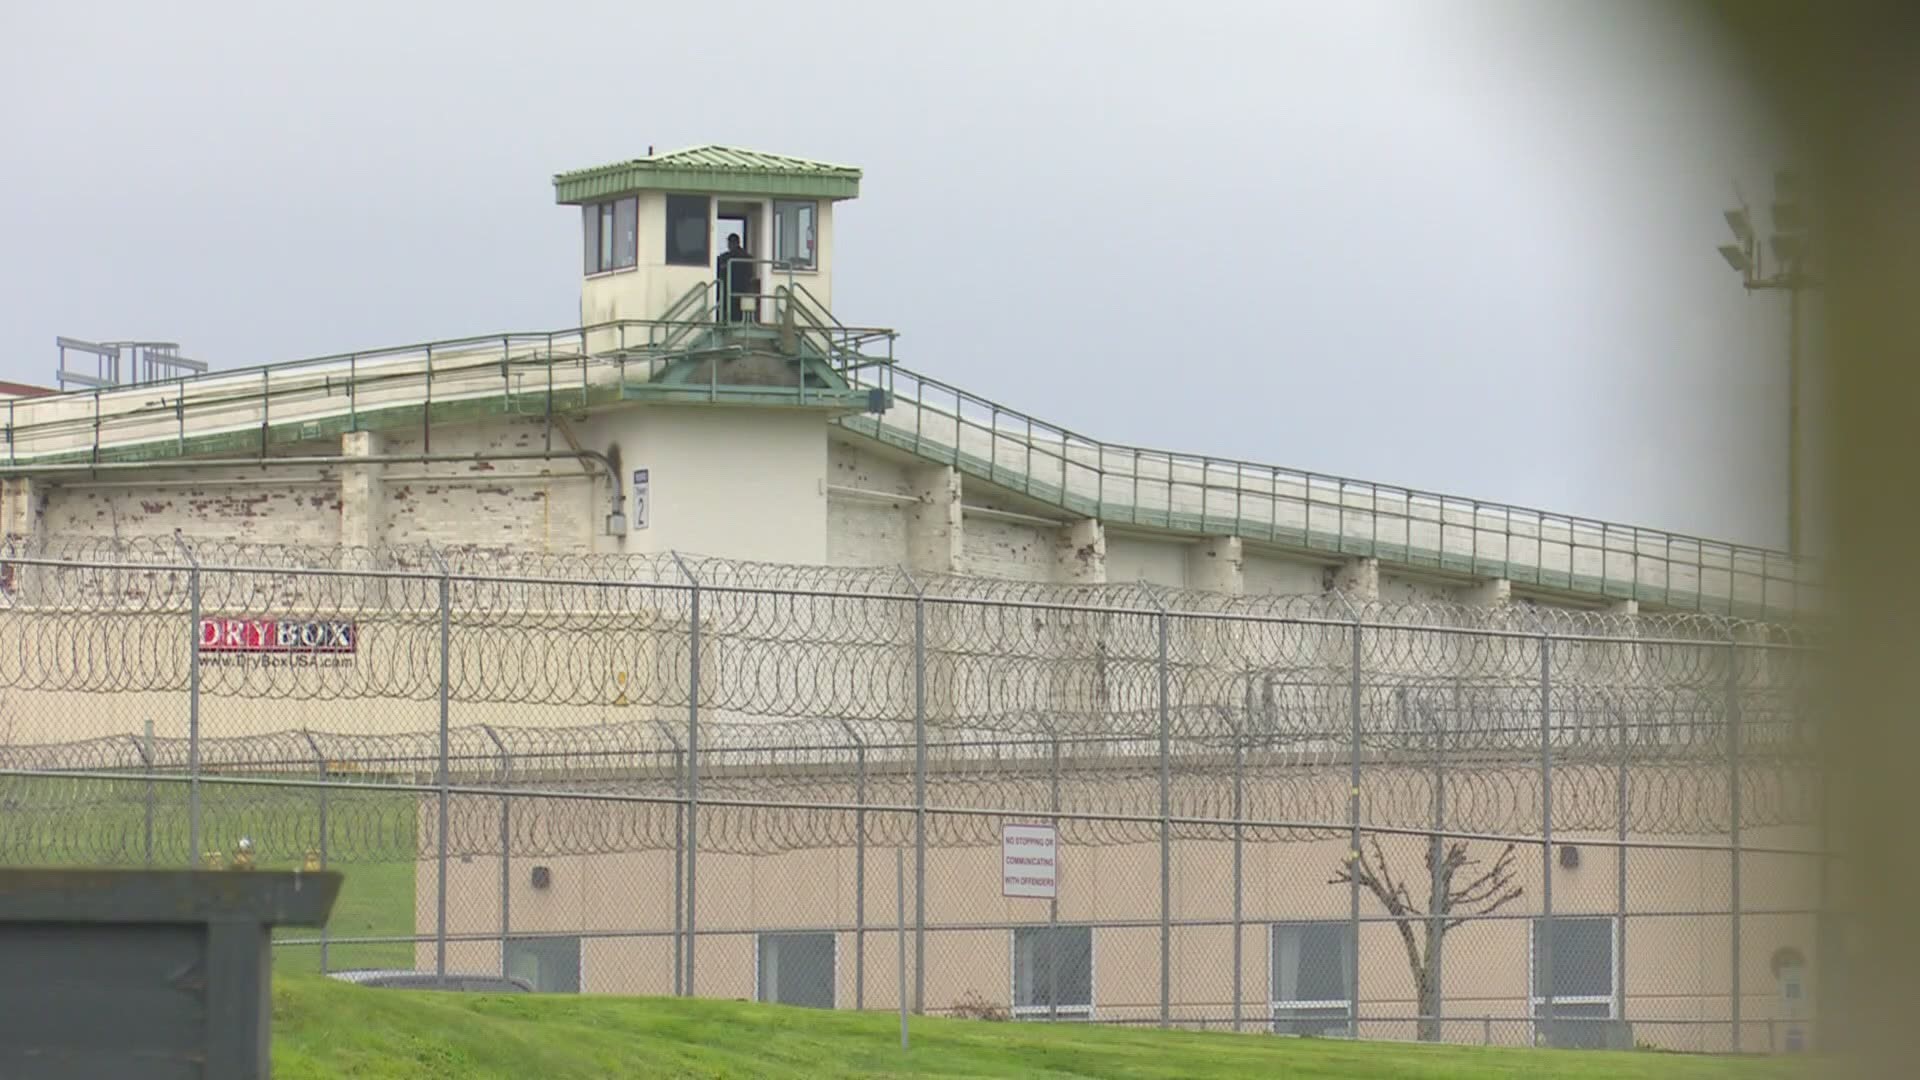 A 54% decrease in prison admissions has led to an $80 million decrease in budget for the Department of Corrections.